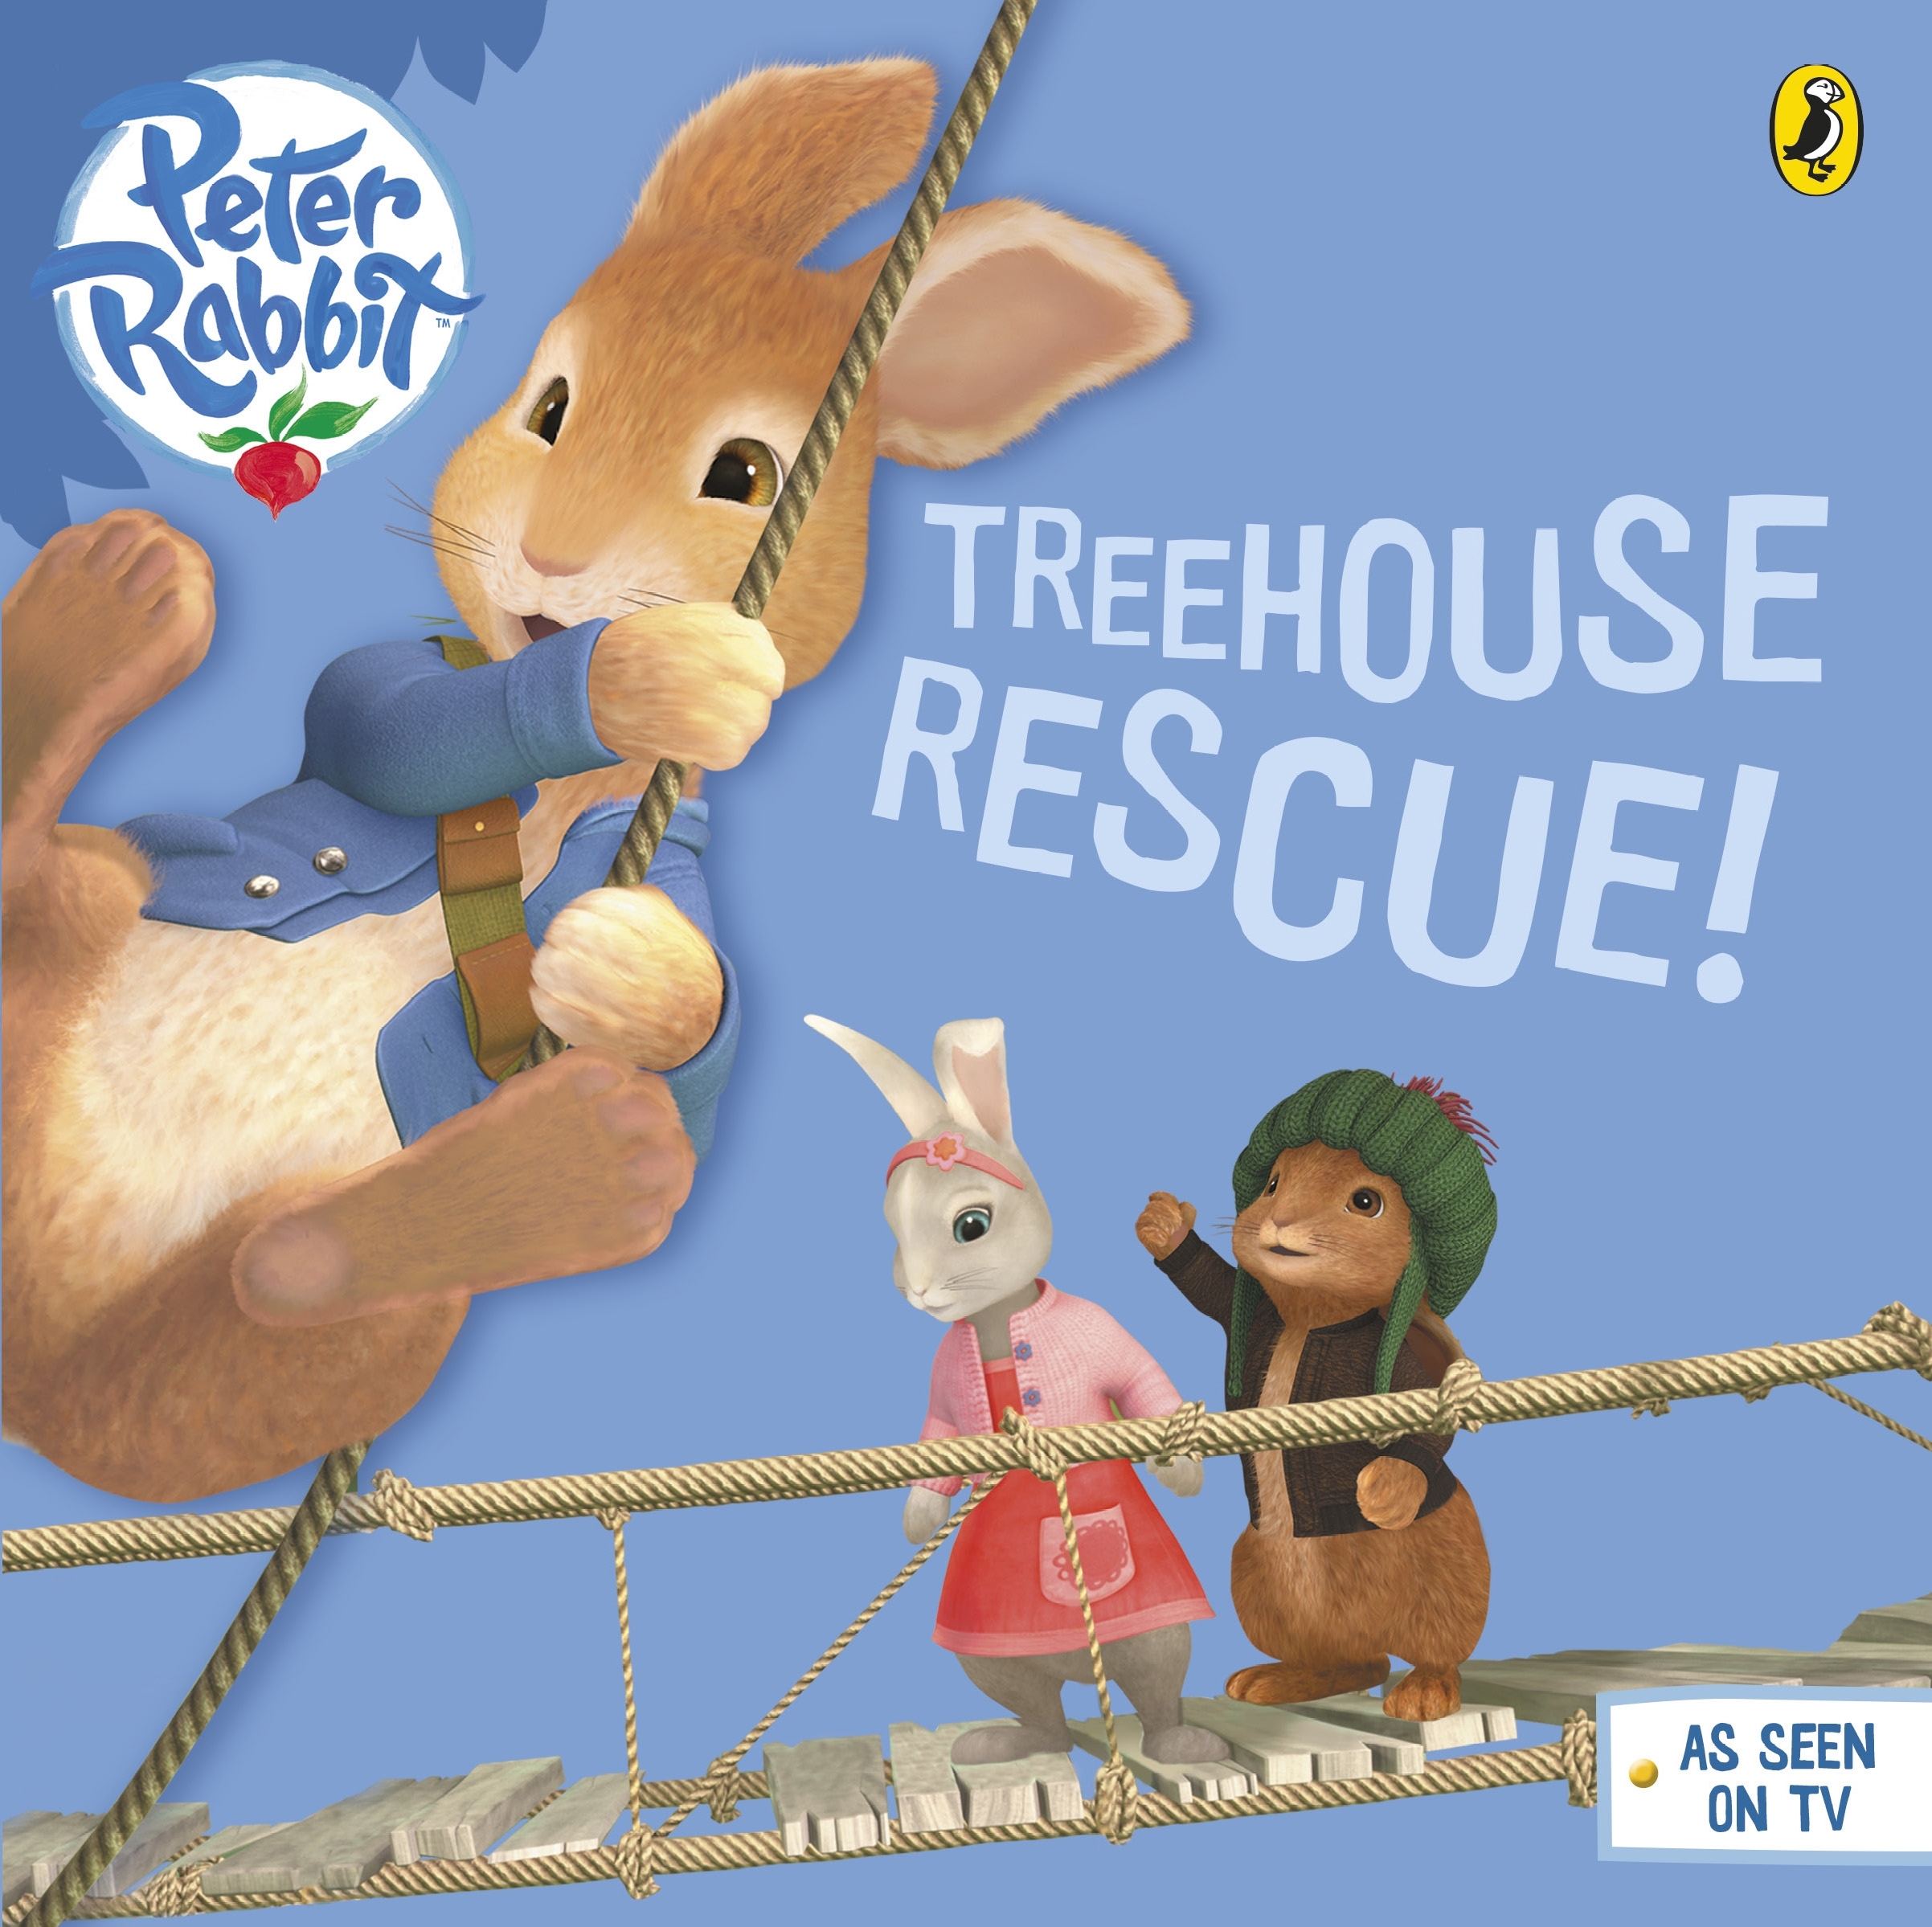 Peter Rabbit Animation: Treehouse Rescue! by Beatrix Potter - Penguin Books  New Zealand